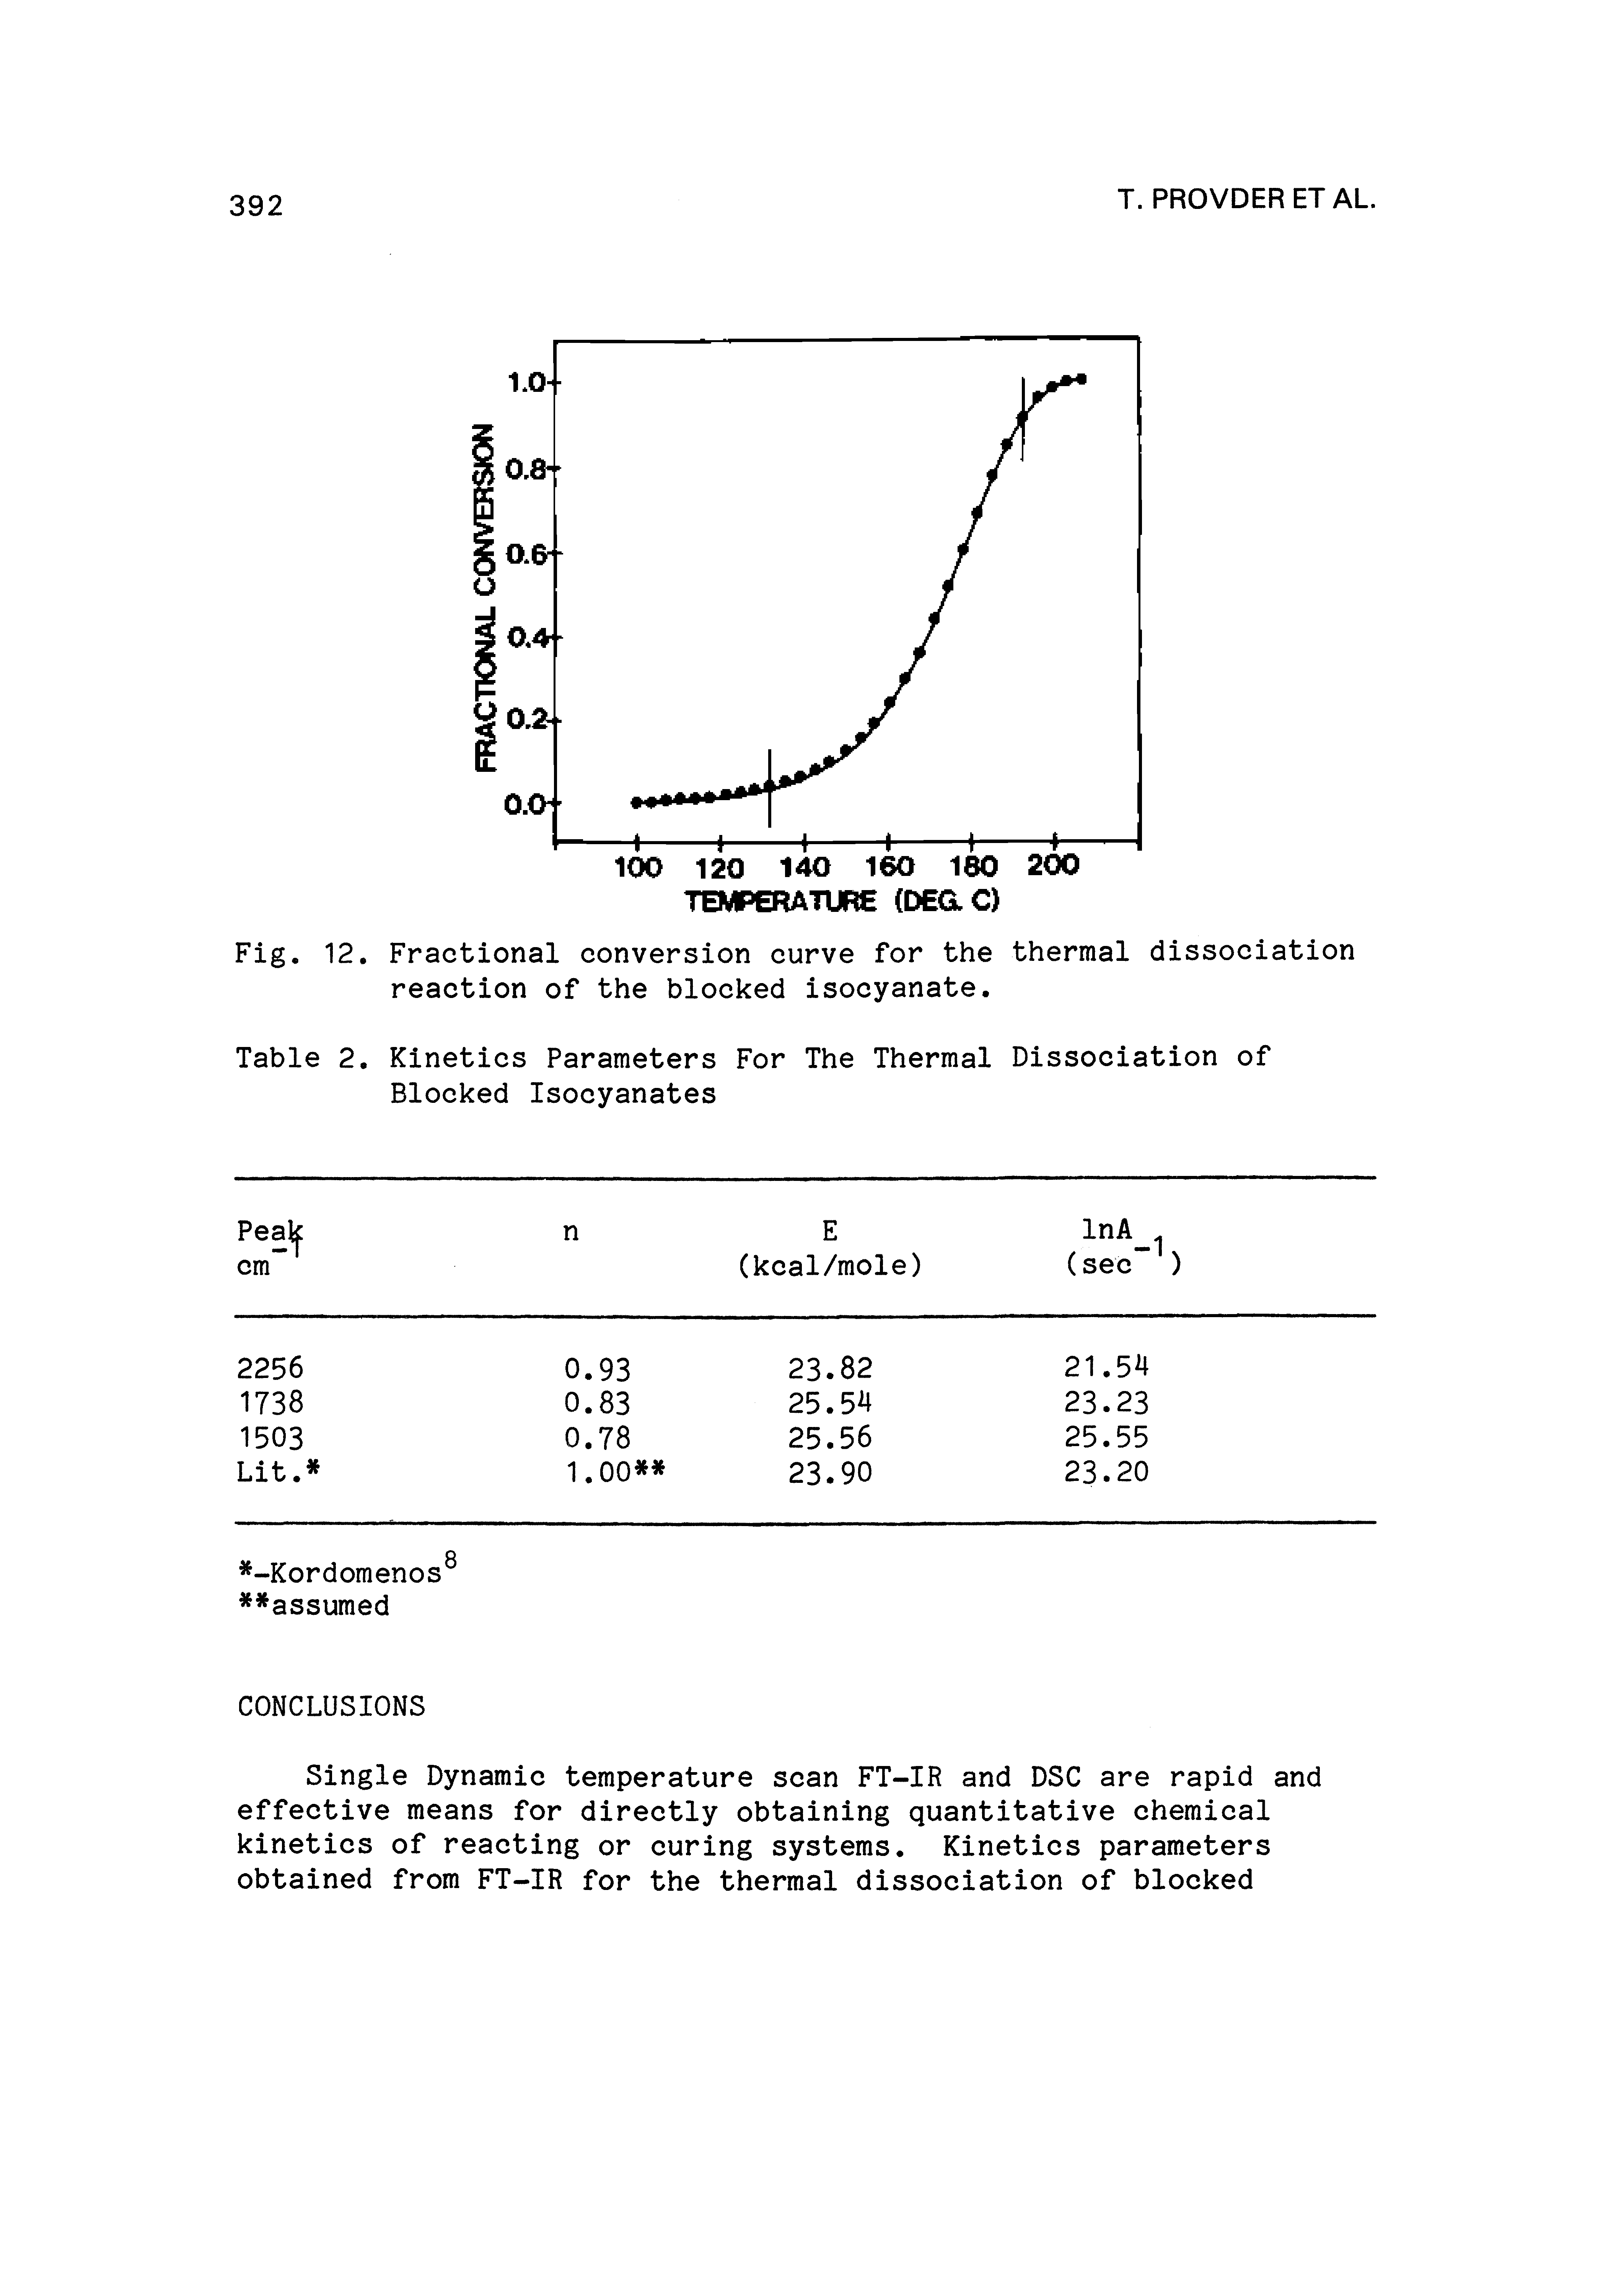 Fig. 12. Fractional conversion curve for the thermal dissociation reaction of the blocked isocyanate.